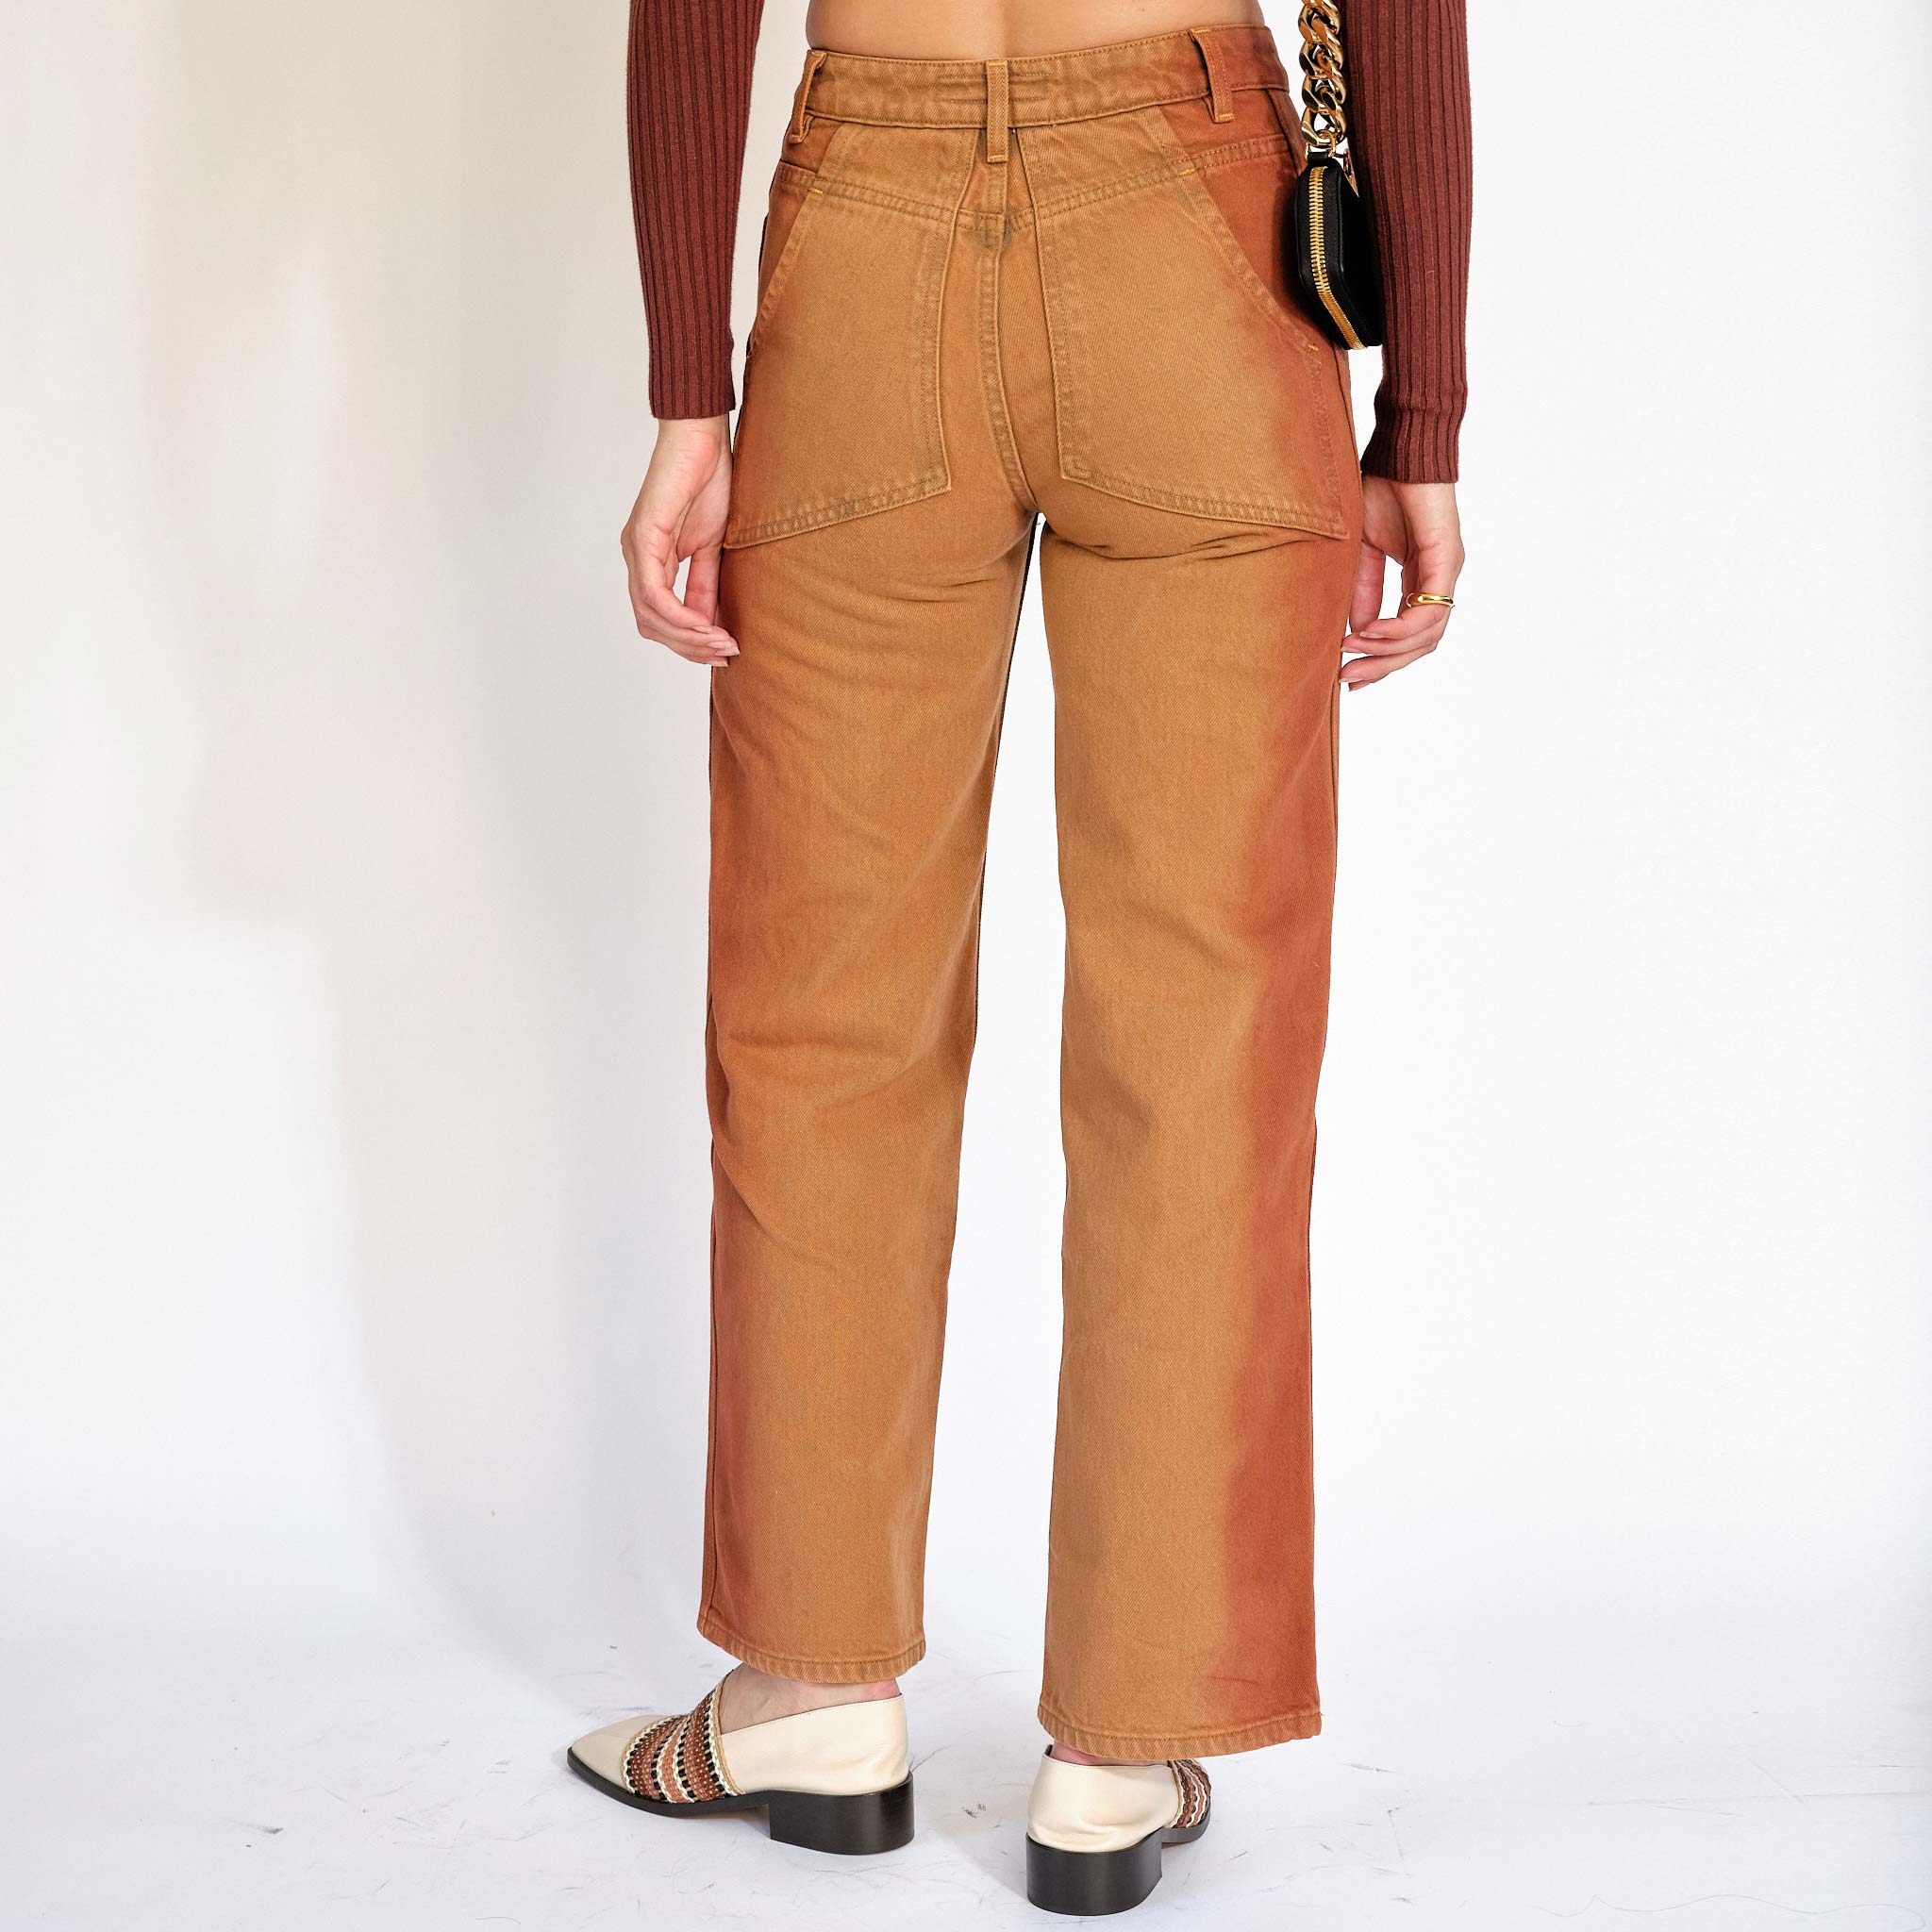 Half body photo of the Eckhaus Latta Wide Leg Jeans in terracotta - back view.